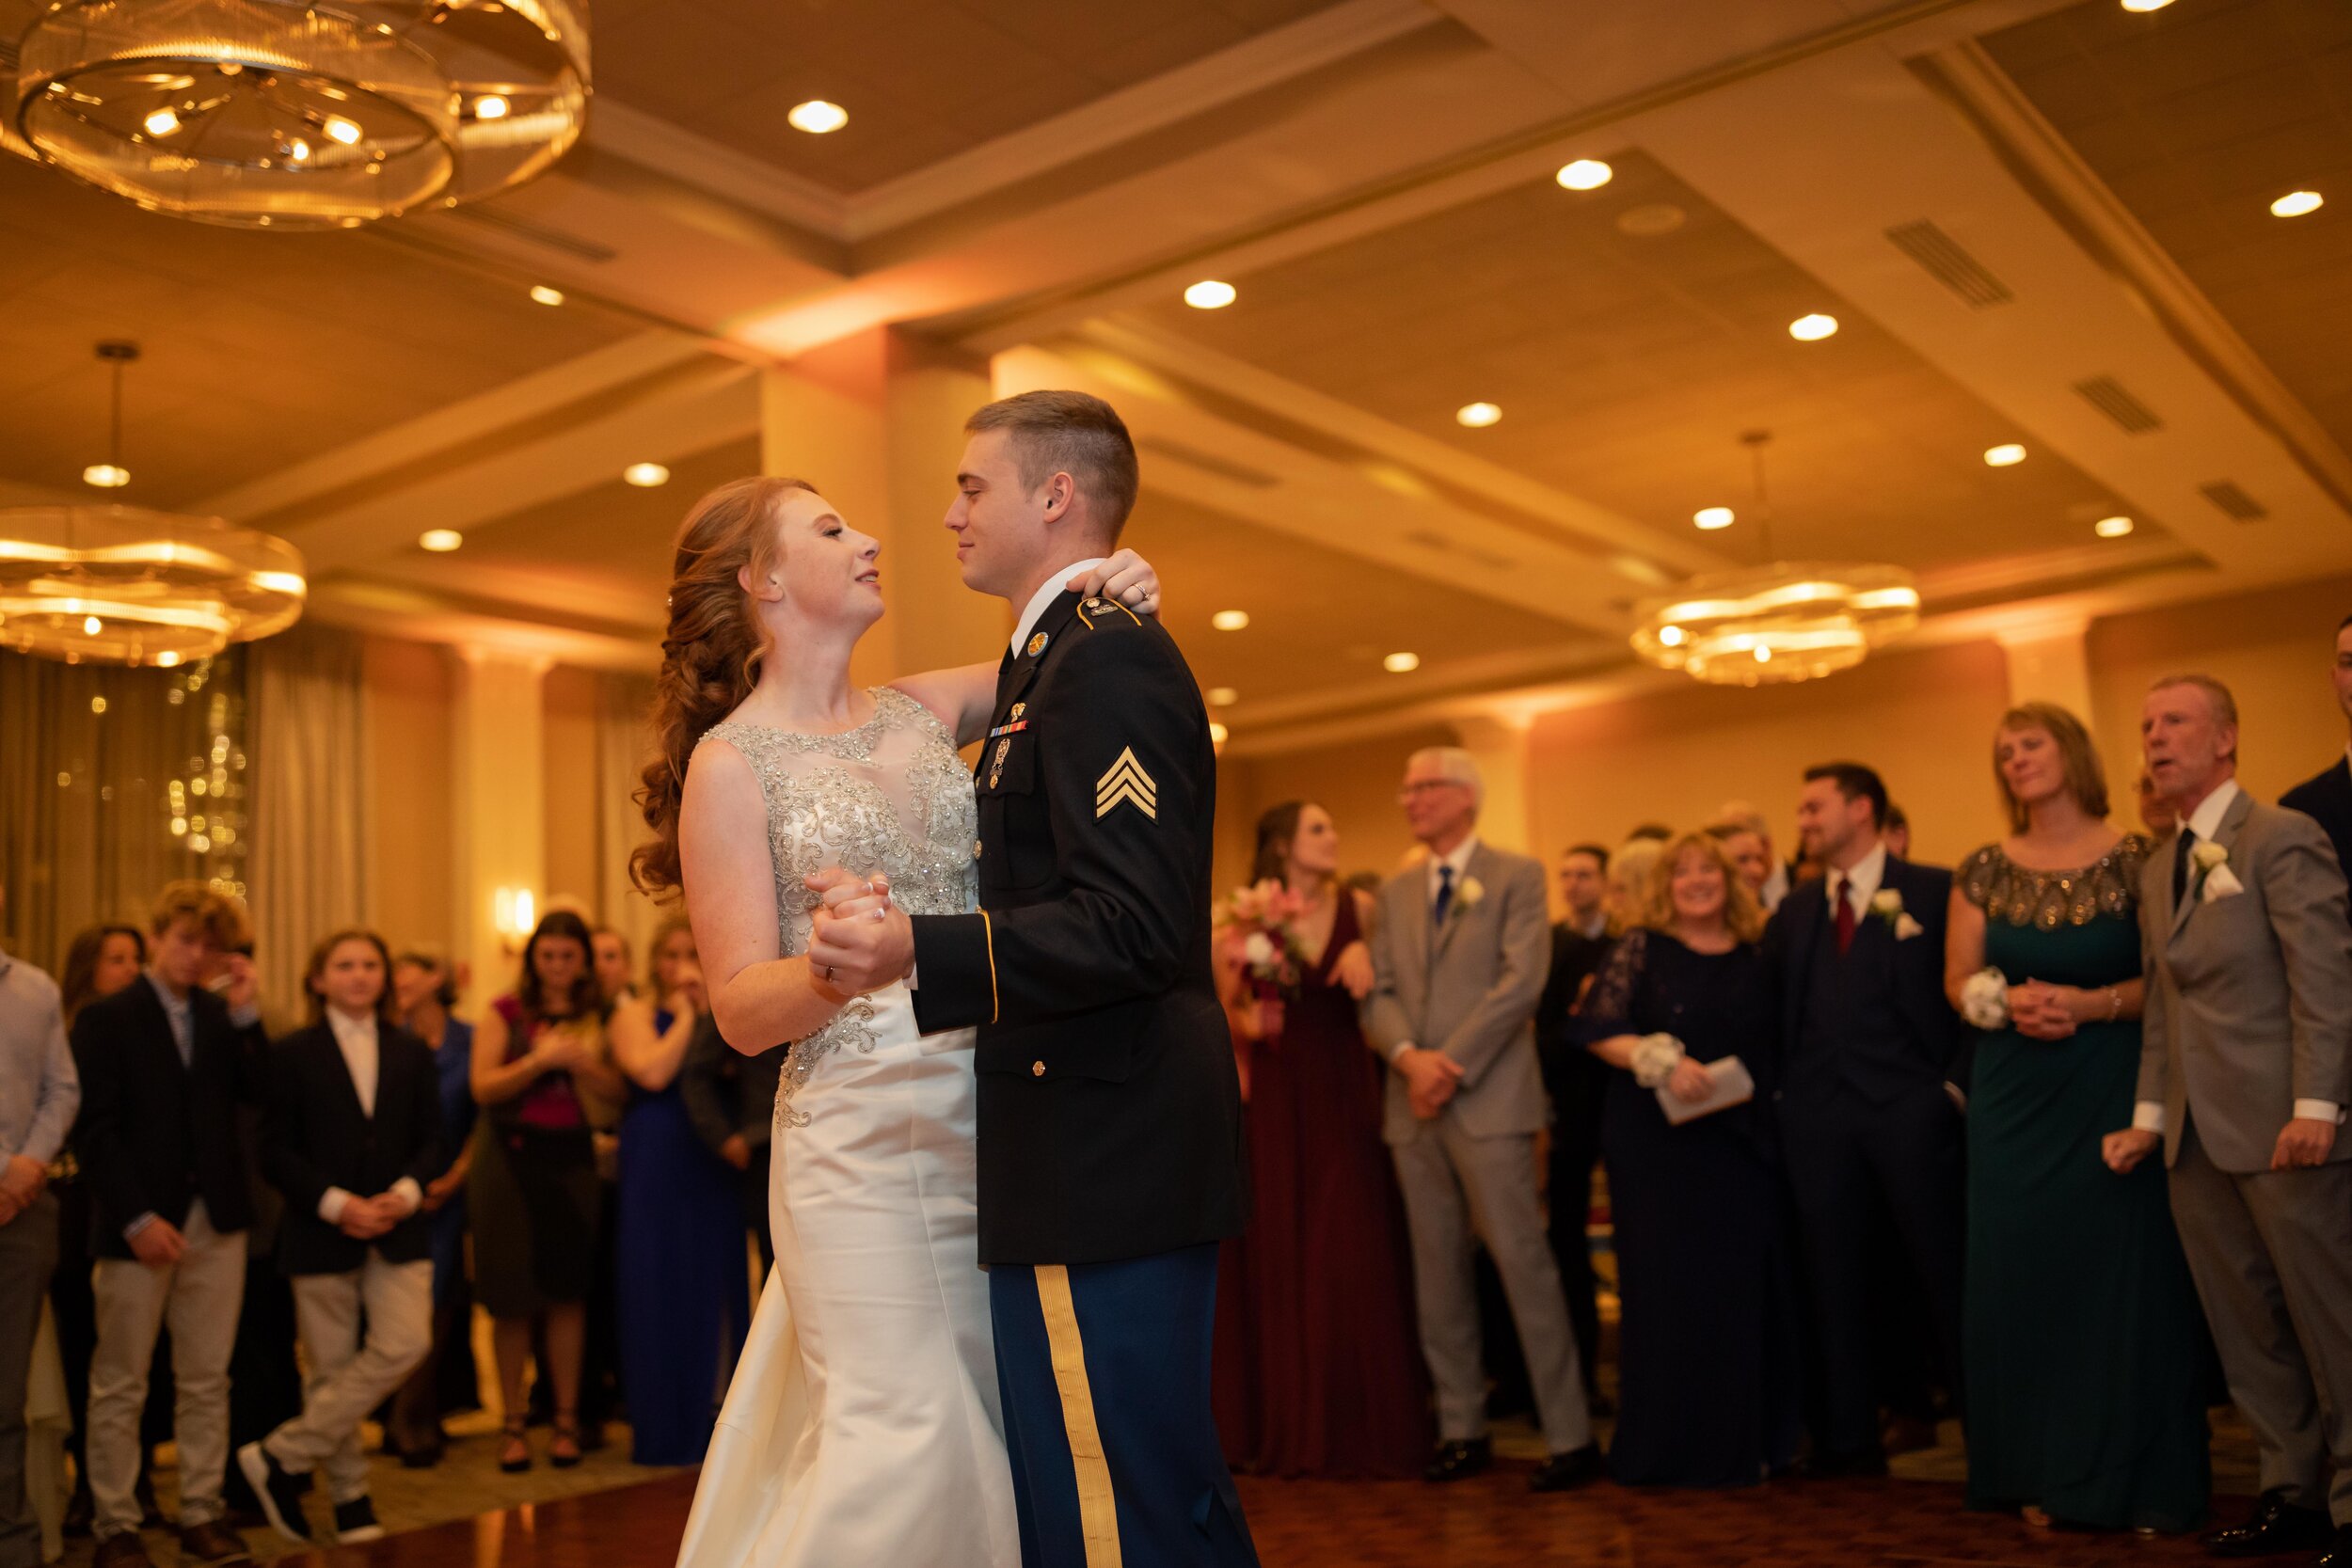 NH Wedding Photography - Jimmy Gray Photo - Portsmouth, NH - Portsmouth Harbor Events Conference Center